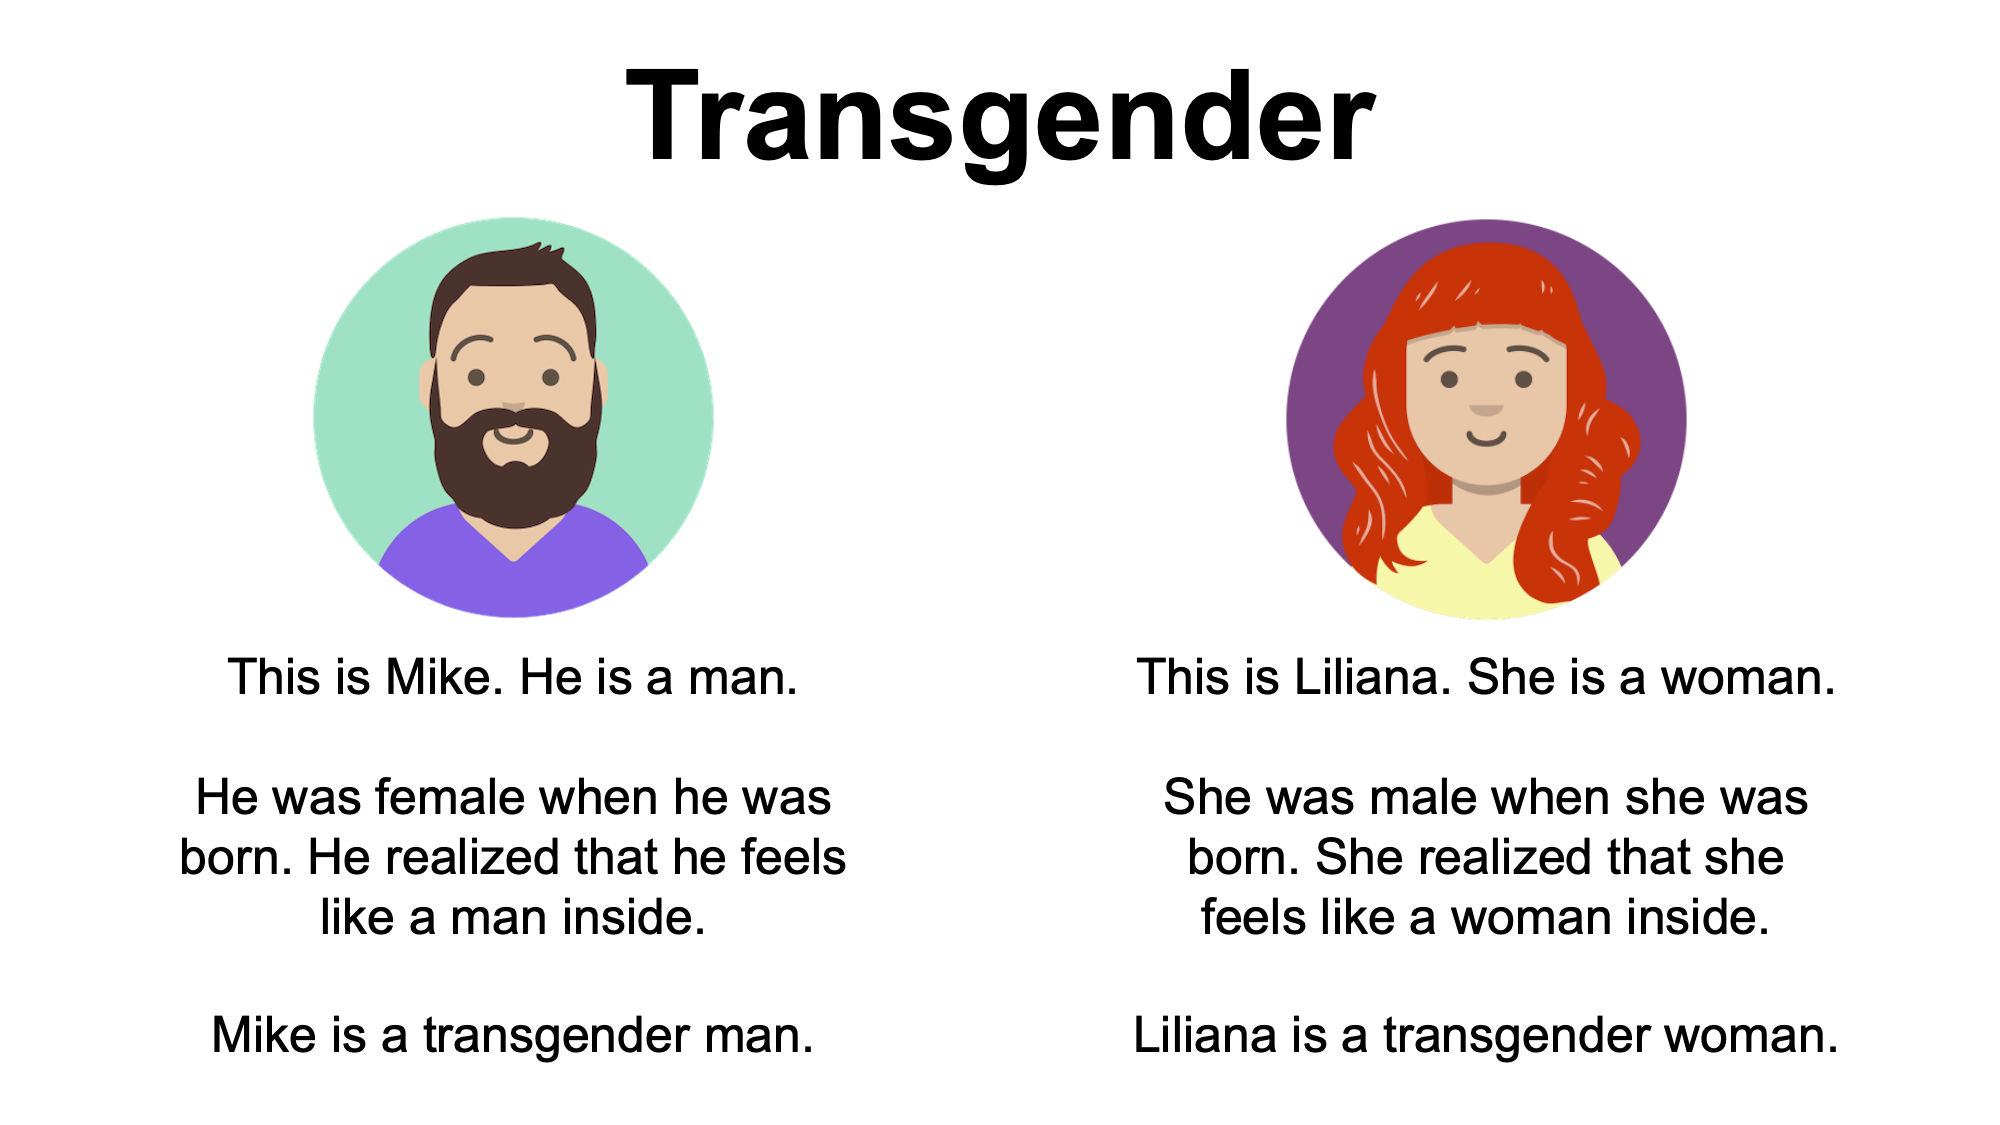 An example of a slide describing two transgender people